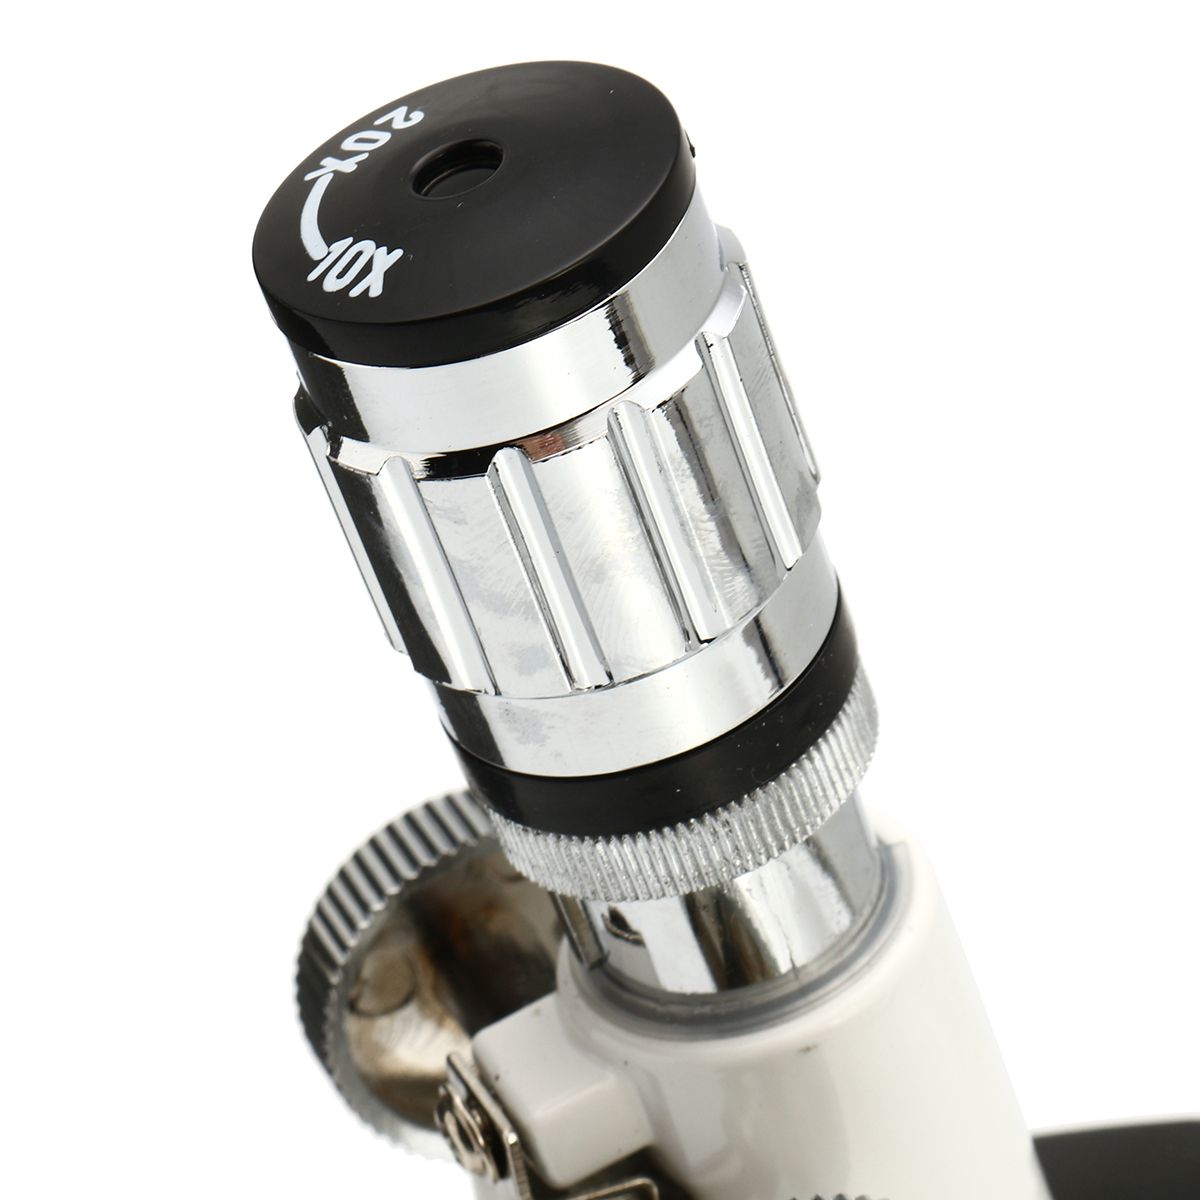 Zoom-Microscope-Kit-Lab-400X-600X-1200X-Magnification-Beginner-For-Kids-Students-1332822